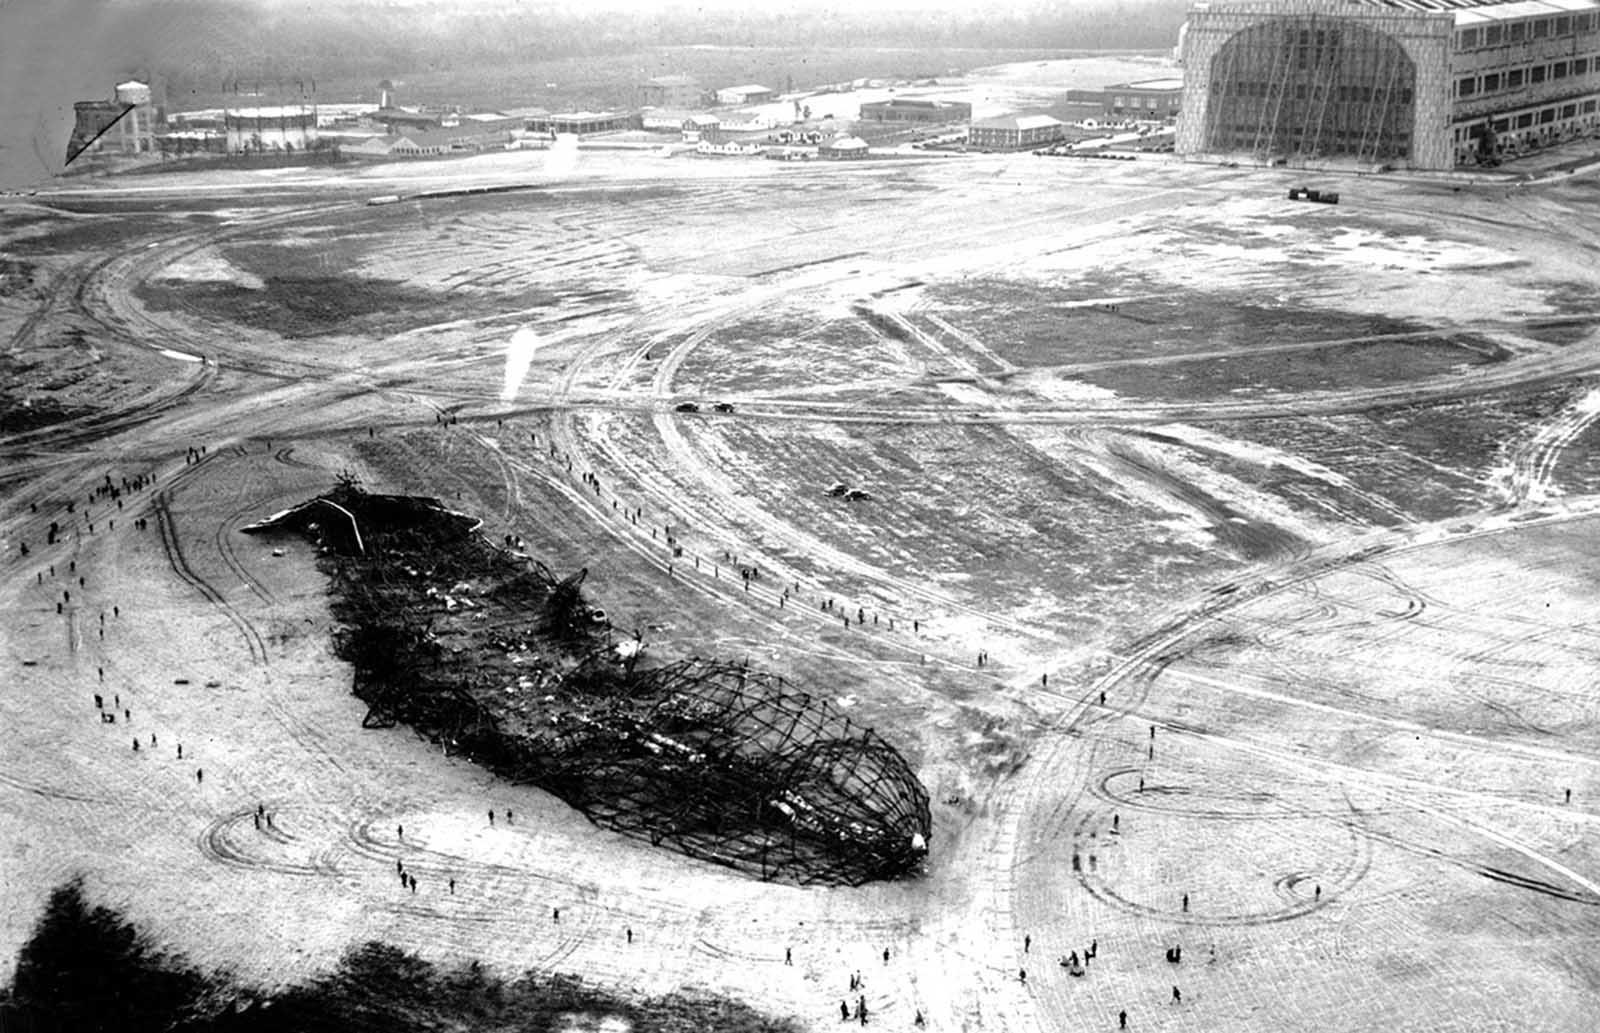 An aerial view of the wreckage of the Hindenburg airship near the hangar at the Naval Air station in Lakehurst, New Jersey, on May 7, 1937.